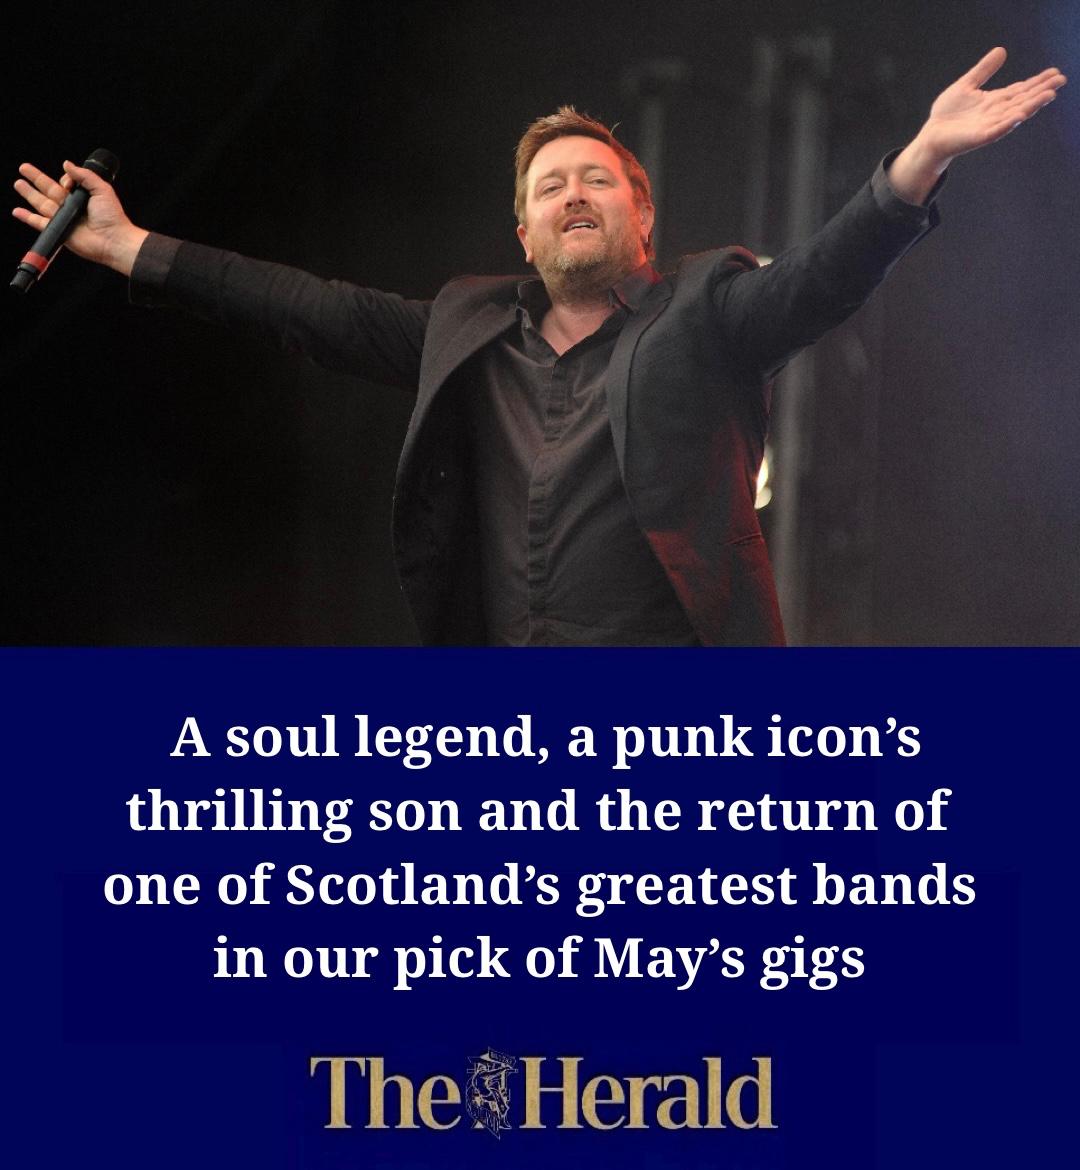 10 Scottish gigs to look out for in May heraldscotland.com/news/24269818.… @TeddyJamieson